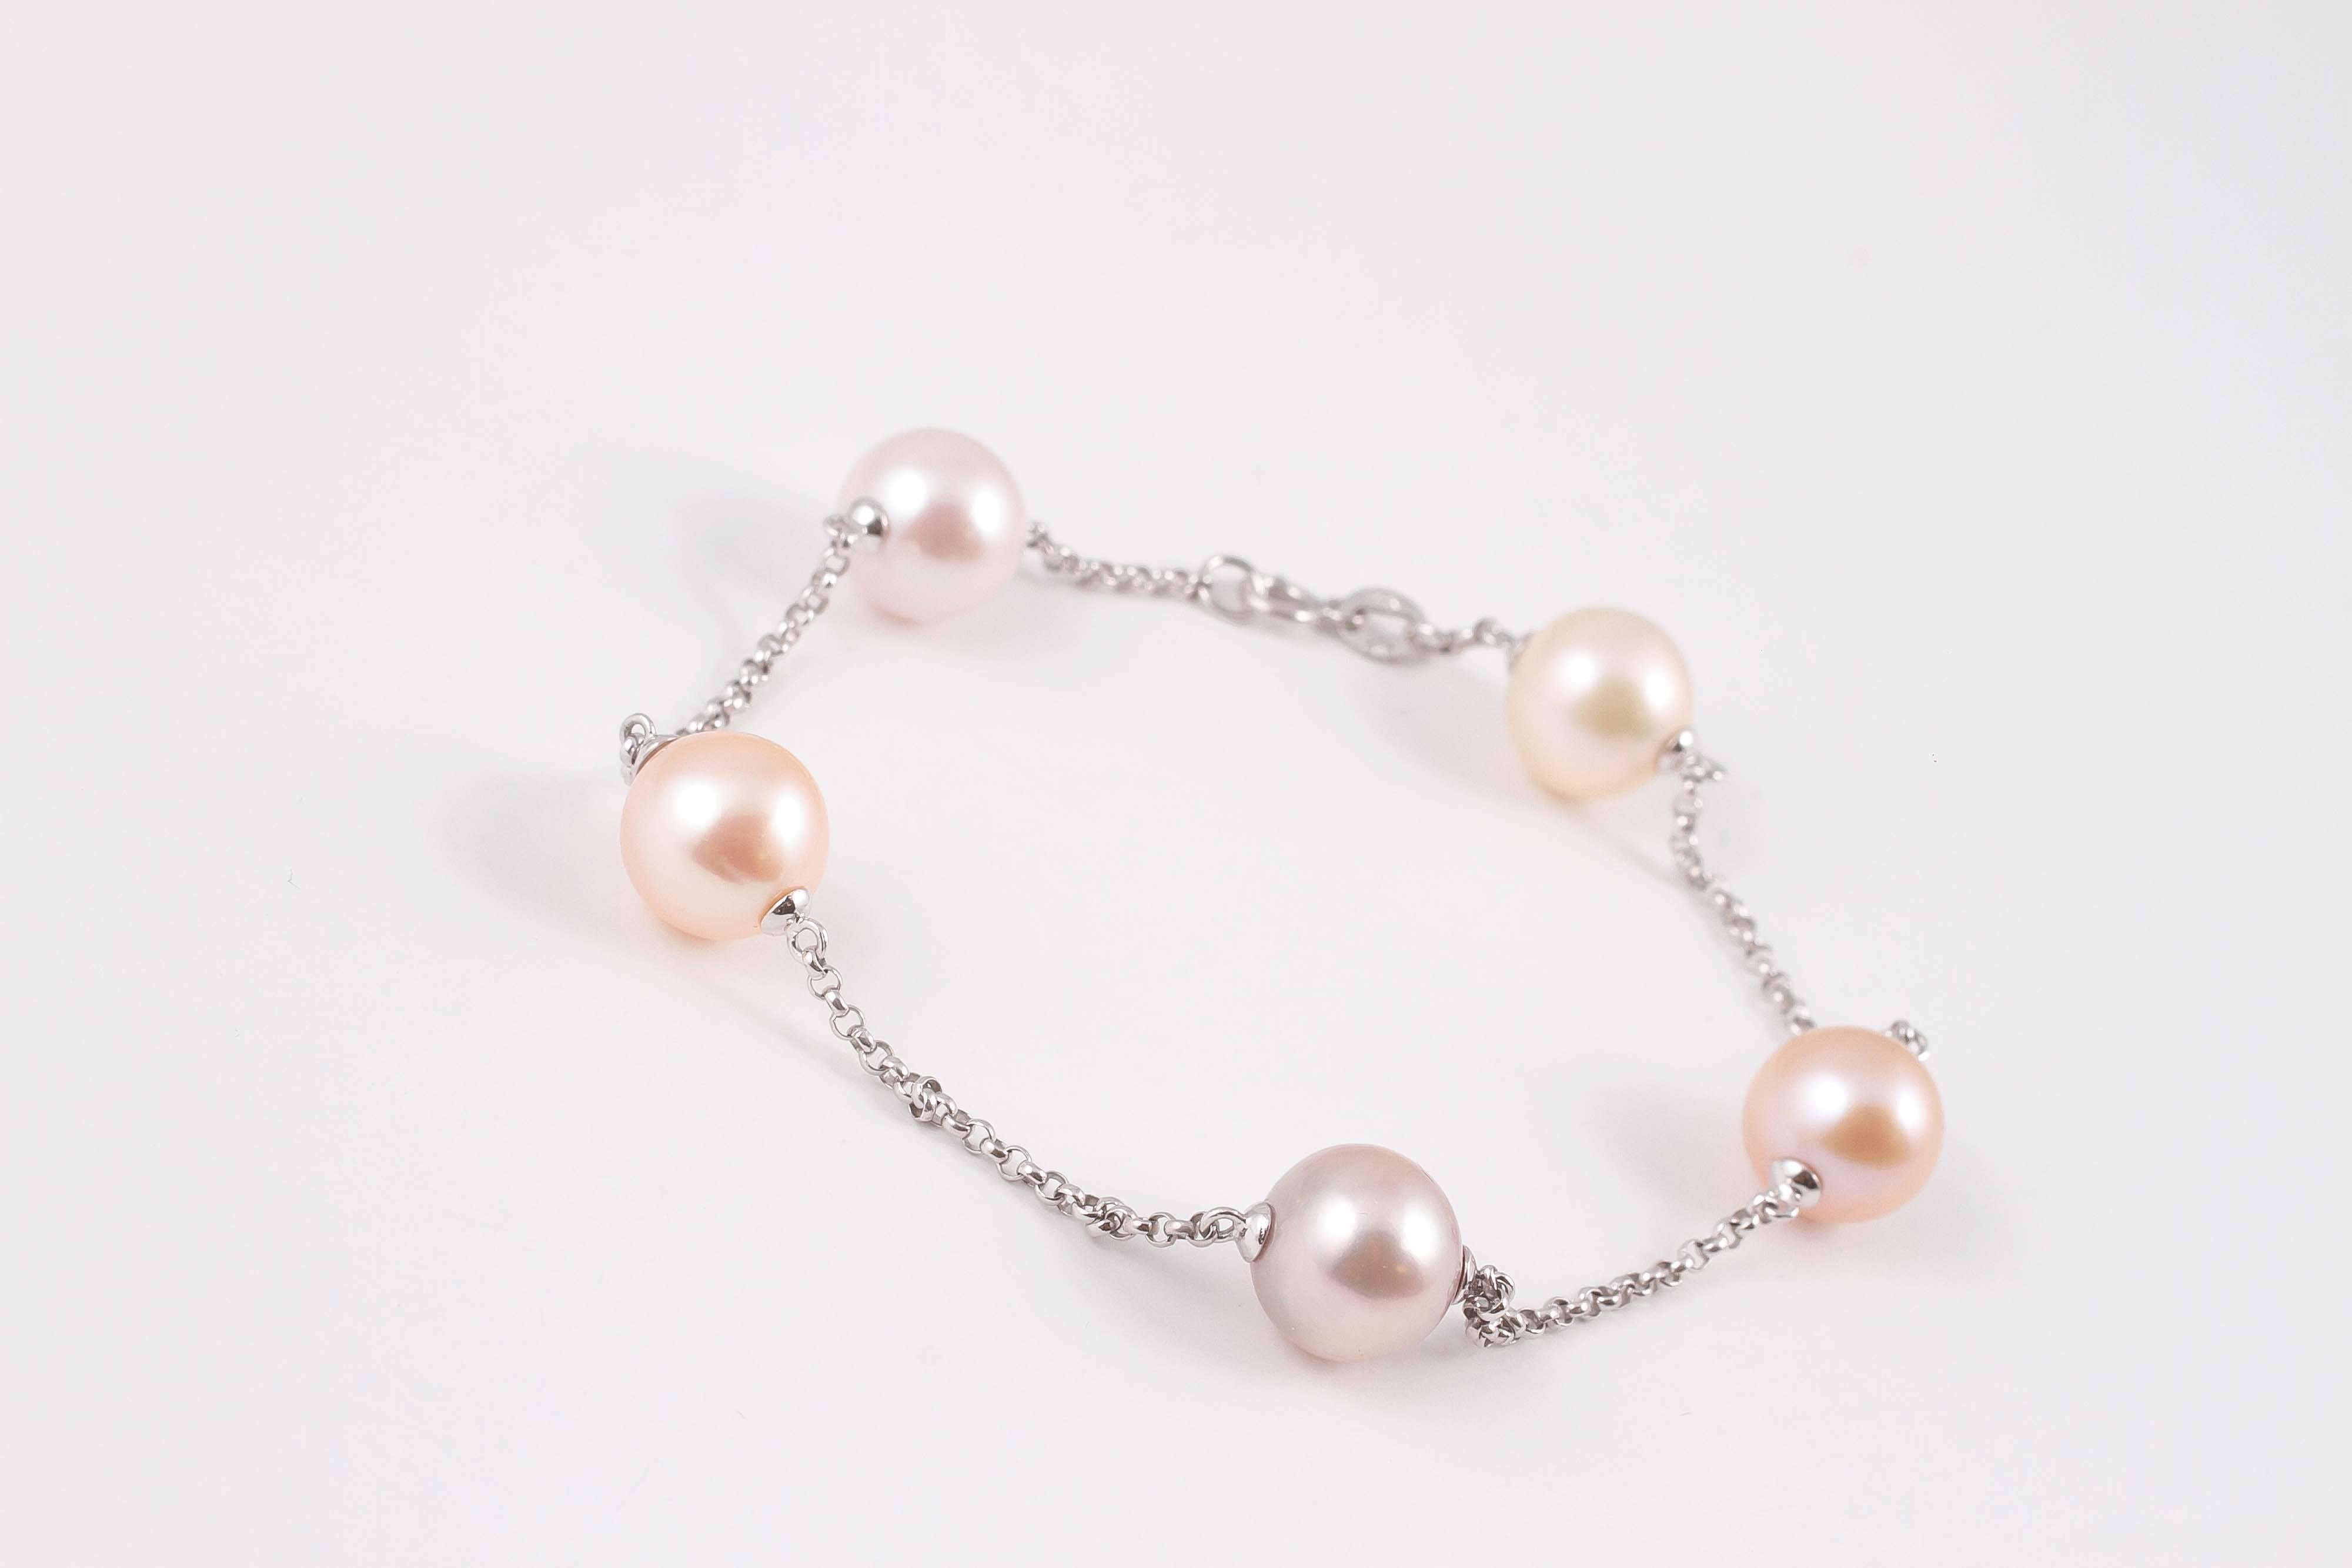 Light and fun, this 14 karat white gold bracelet by Mastoloni features five soft pastel and silver - white cultured pearls, each measuring approximately 10.50 mm.